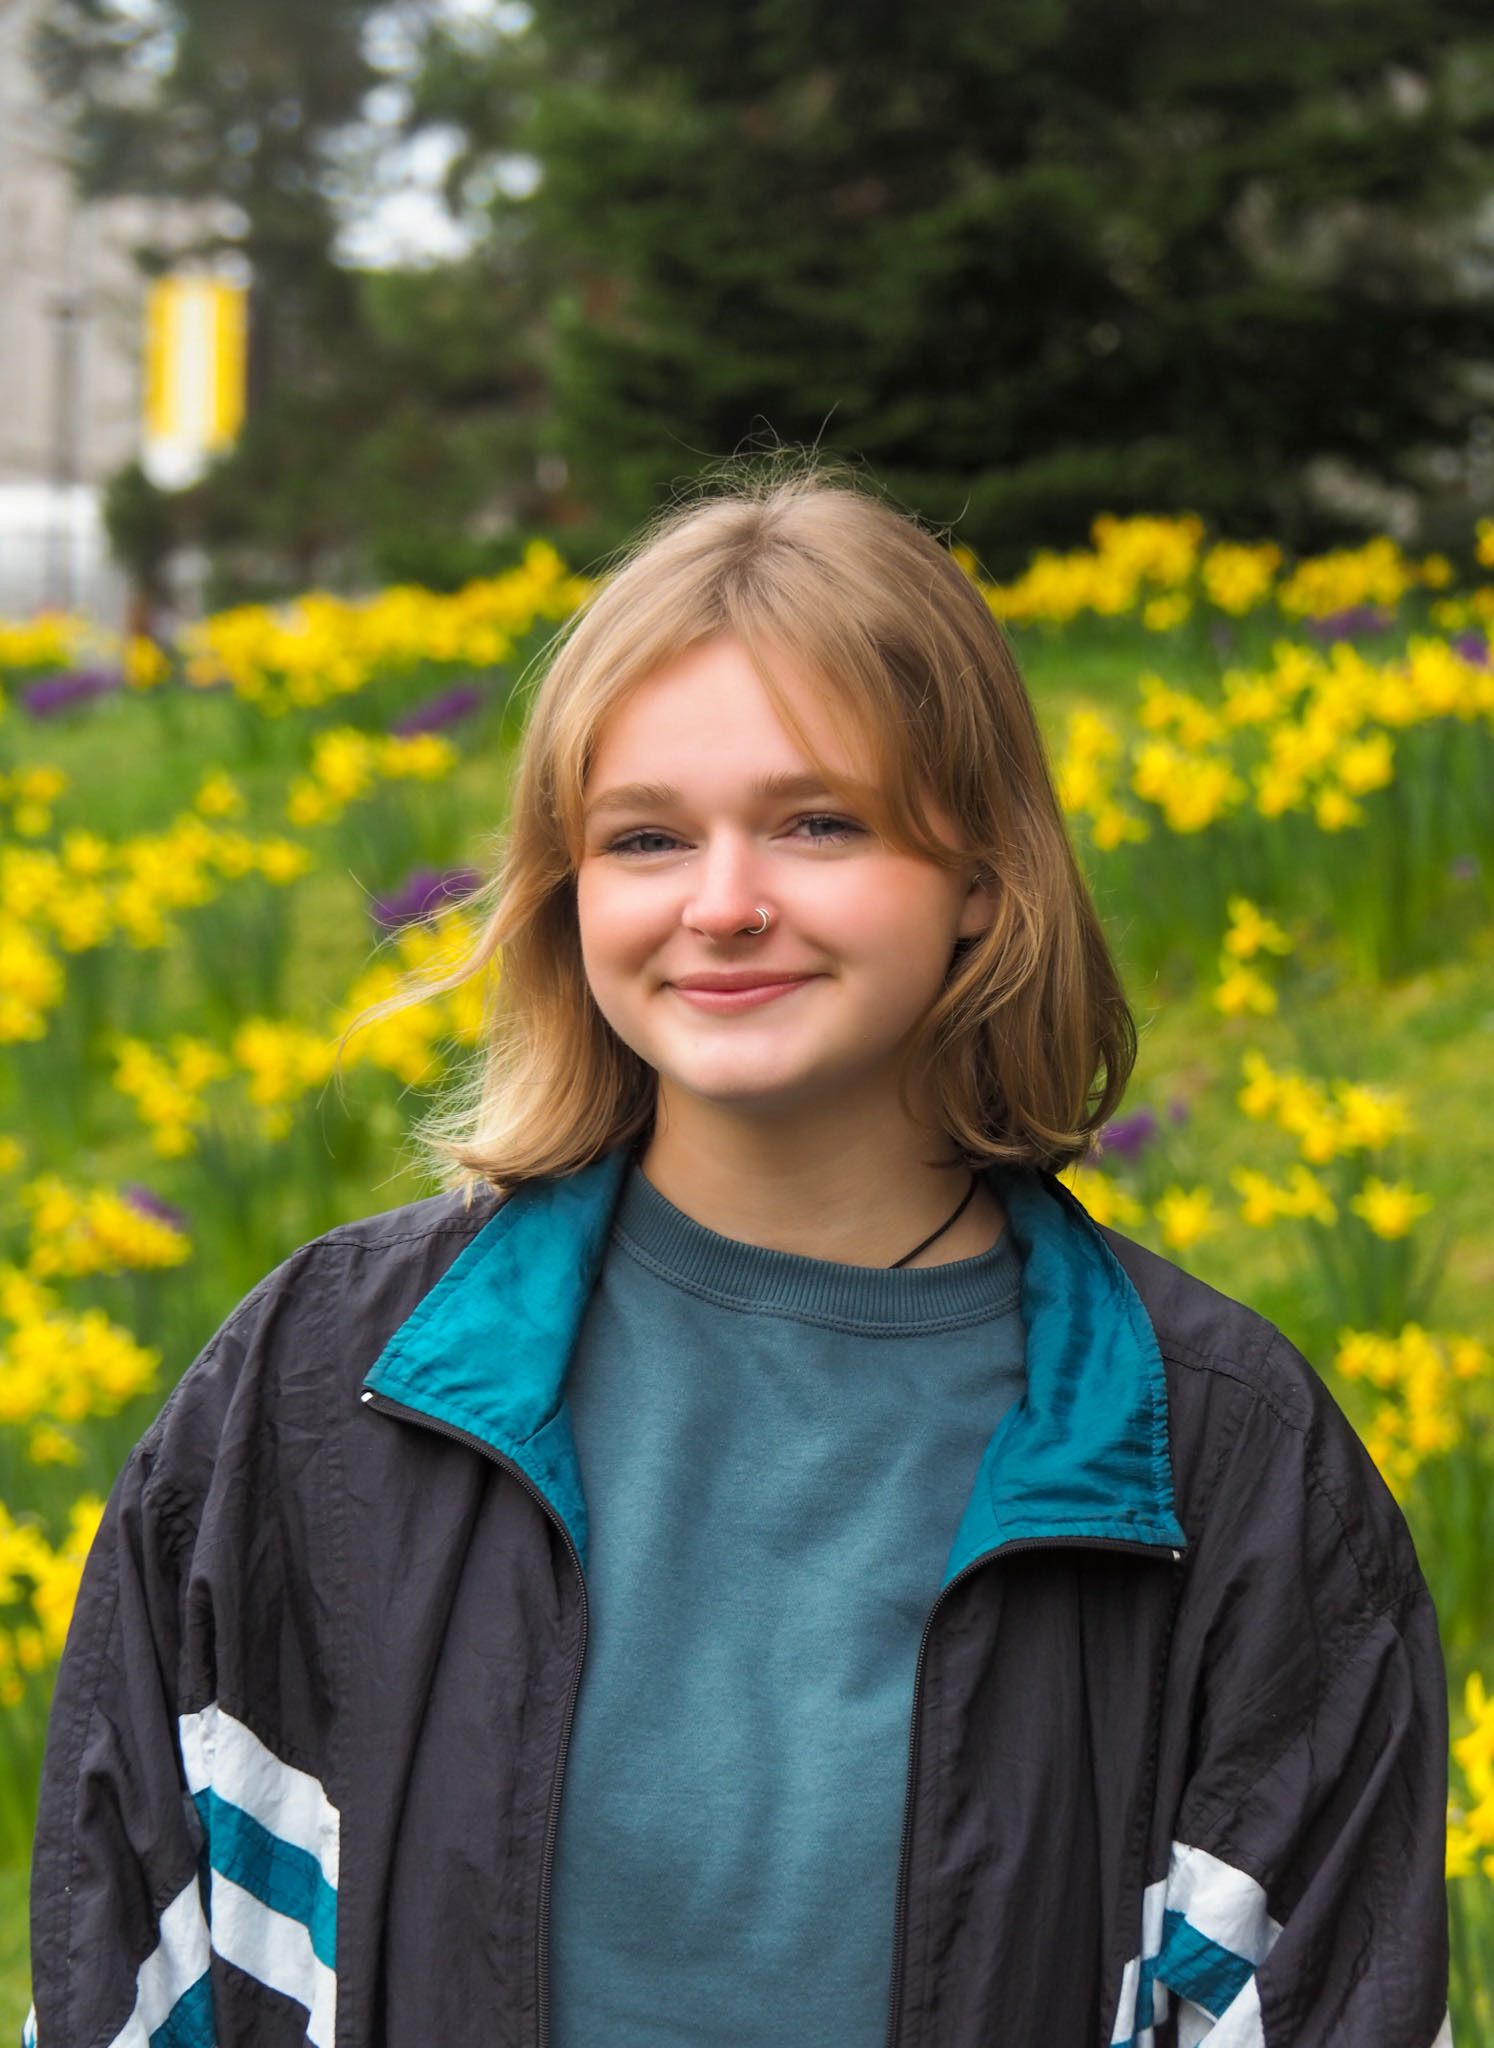 Head and shoulder shot of smiling student against a garden with yellow daffodils.